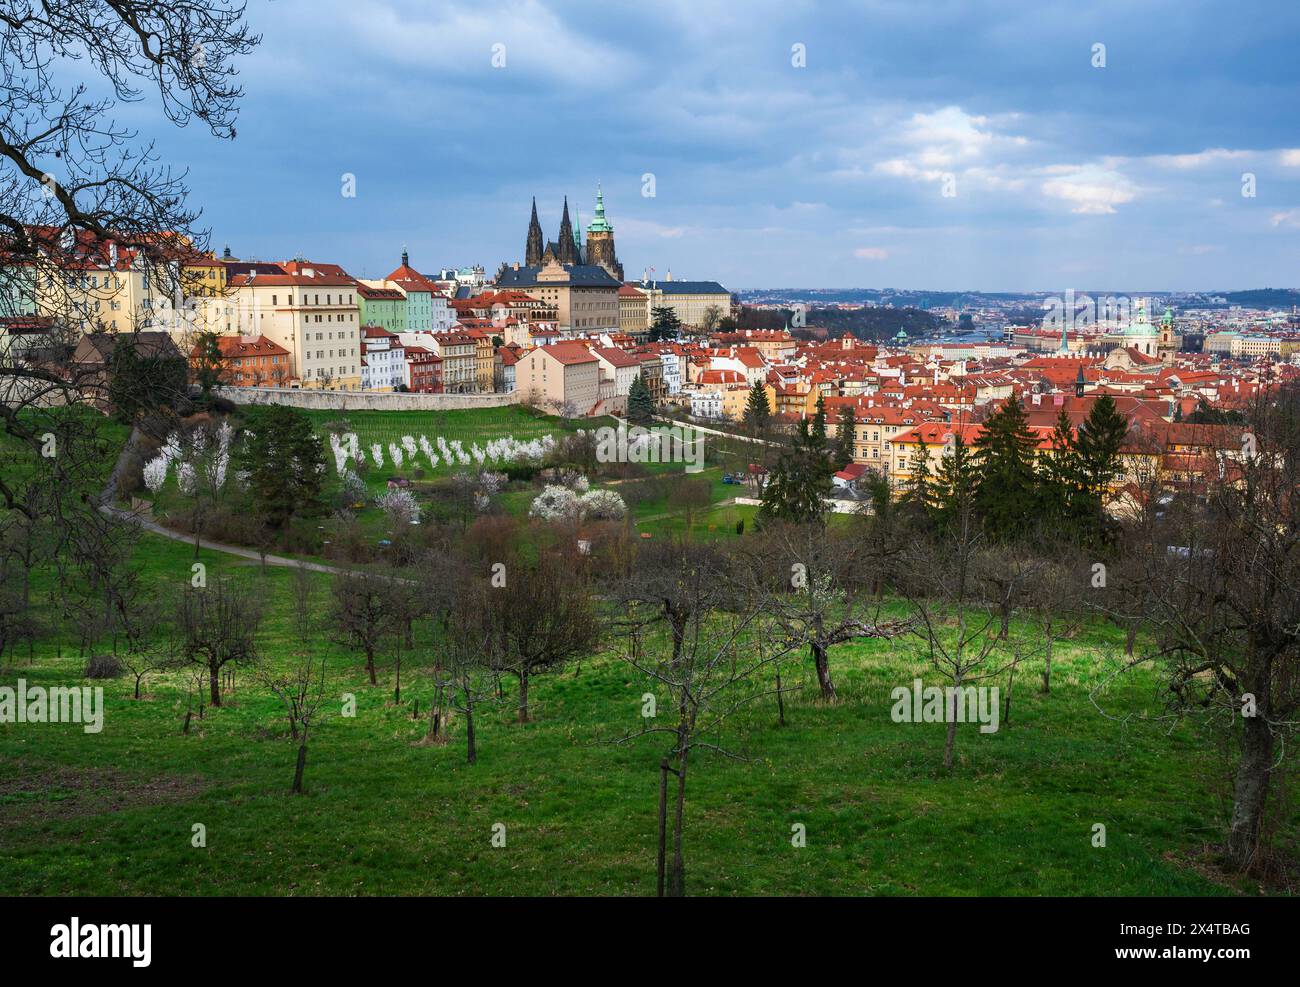 Prague castle and blooming Strahov garden, picturesque building with red roof in Prague, Czech republic. Stock Photo